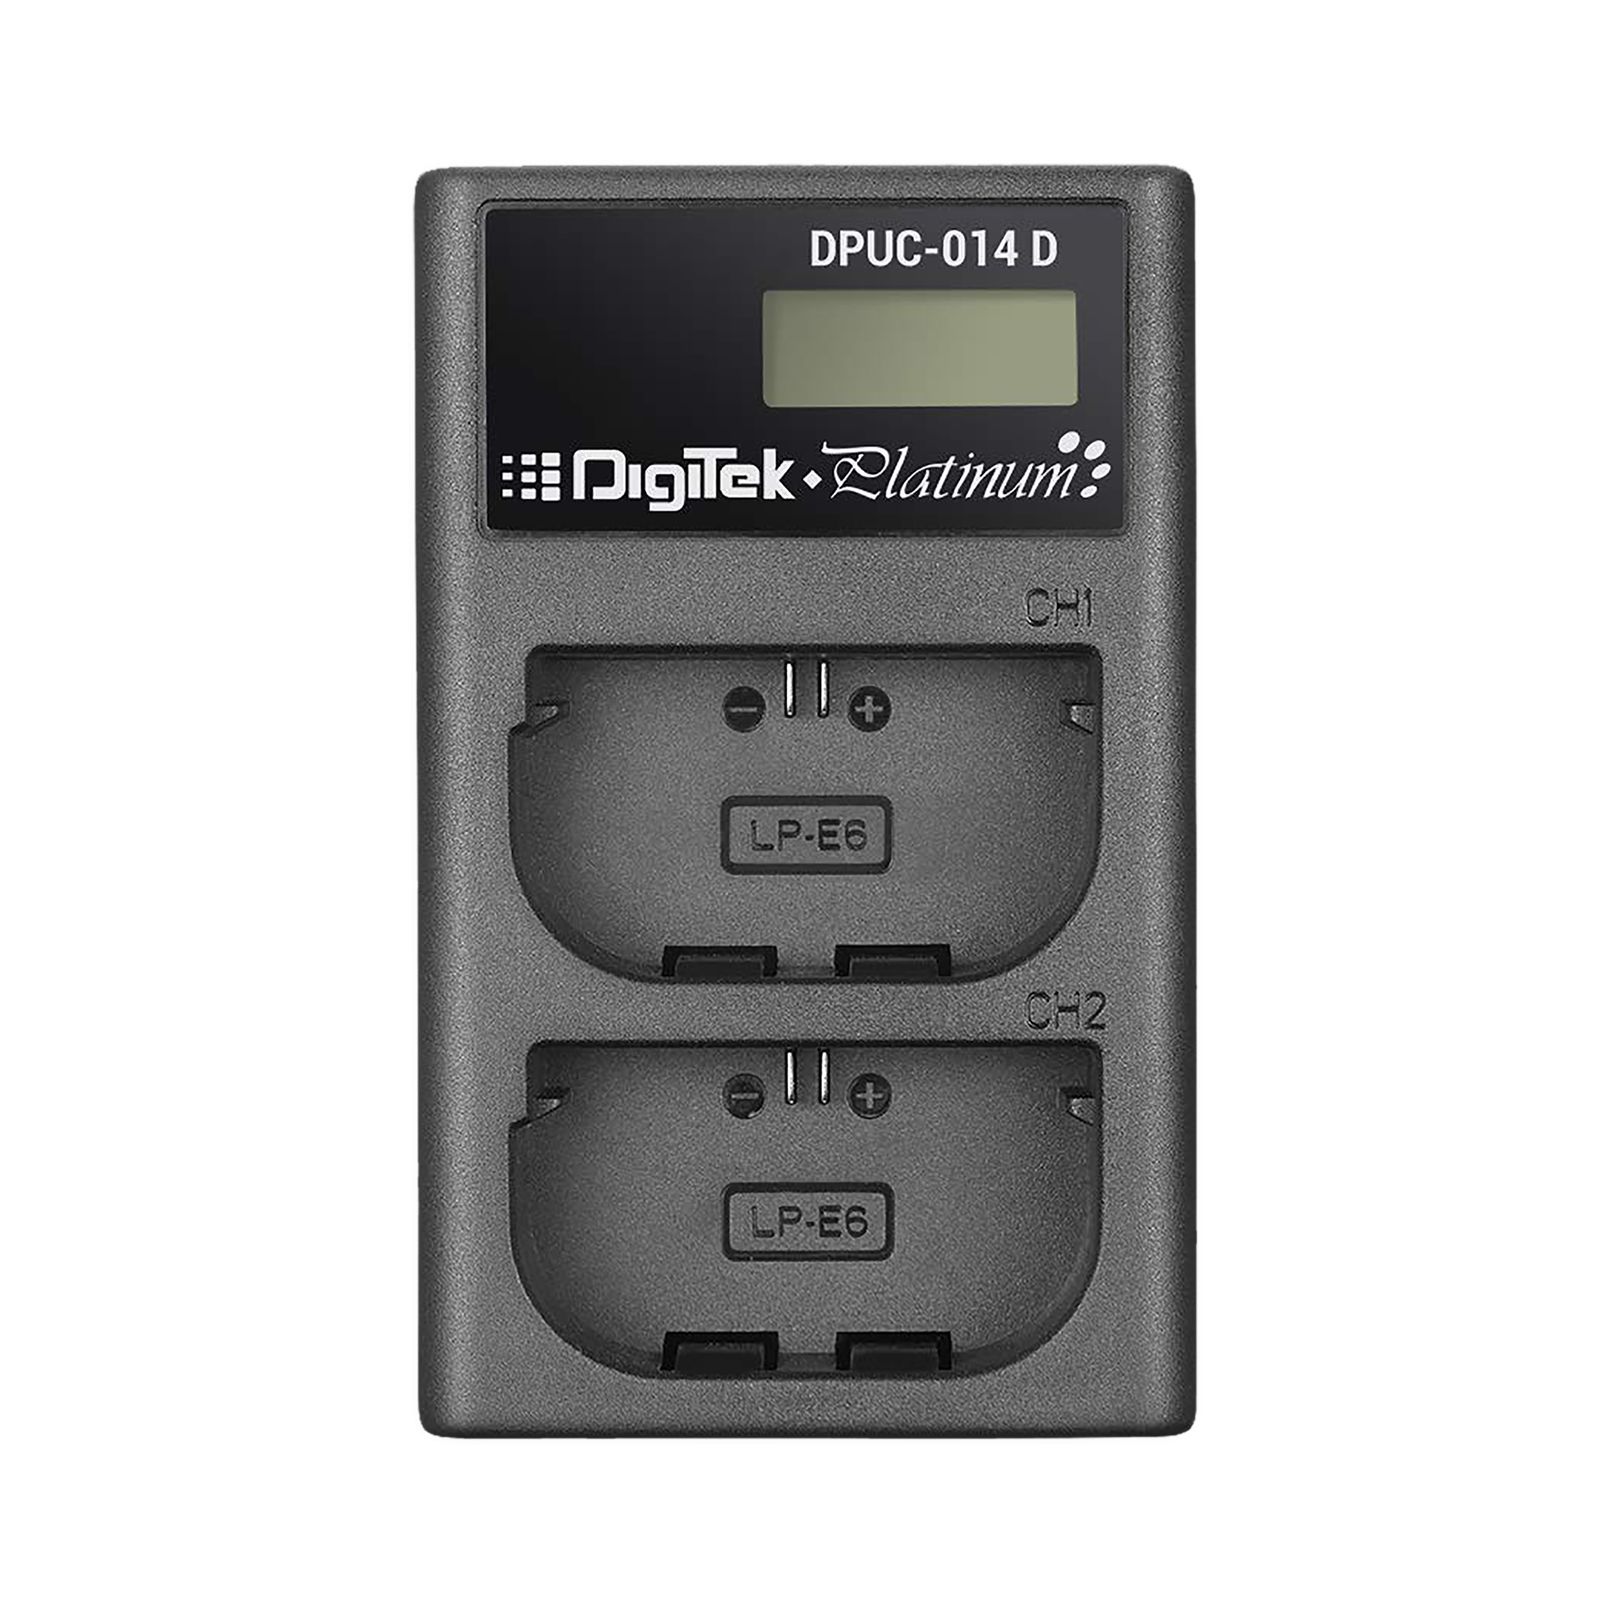 DigiTek Platinum DPUC 014D (LCD MU) Fast Camera Battery Charger for FZ100 (2-Ports, Over Voltage Protection)_1